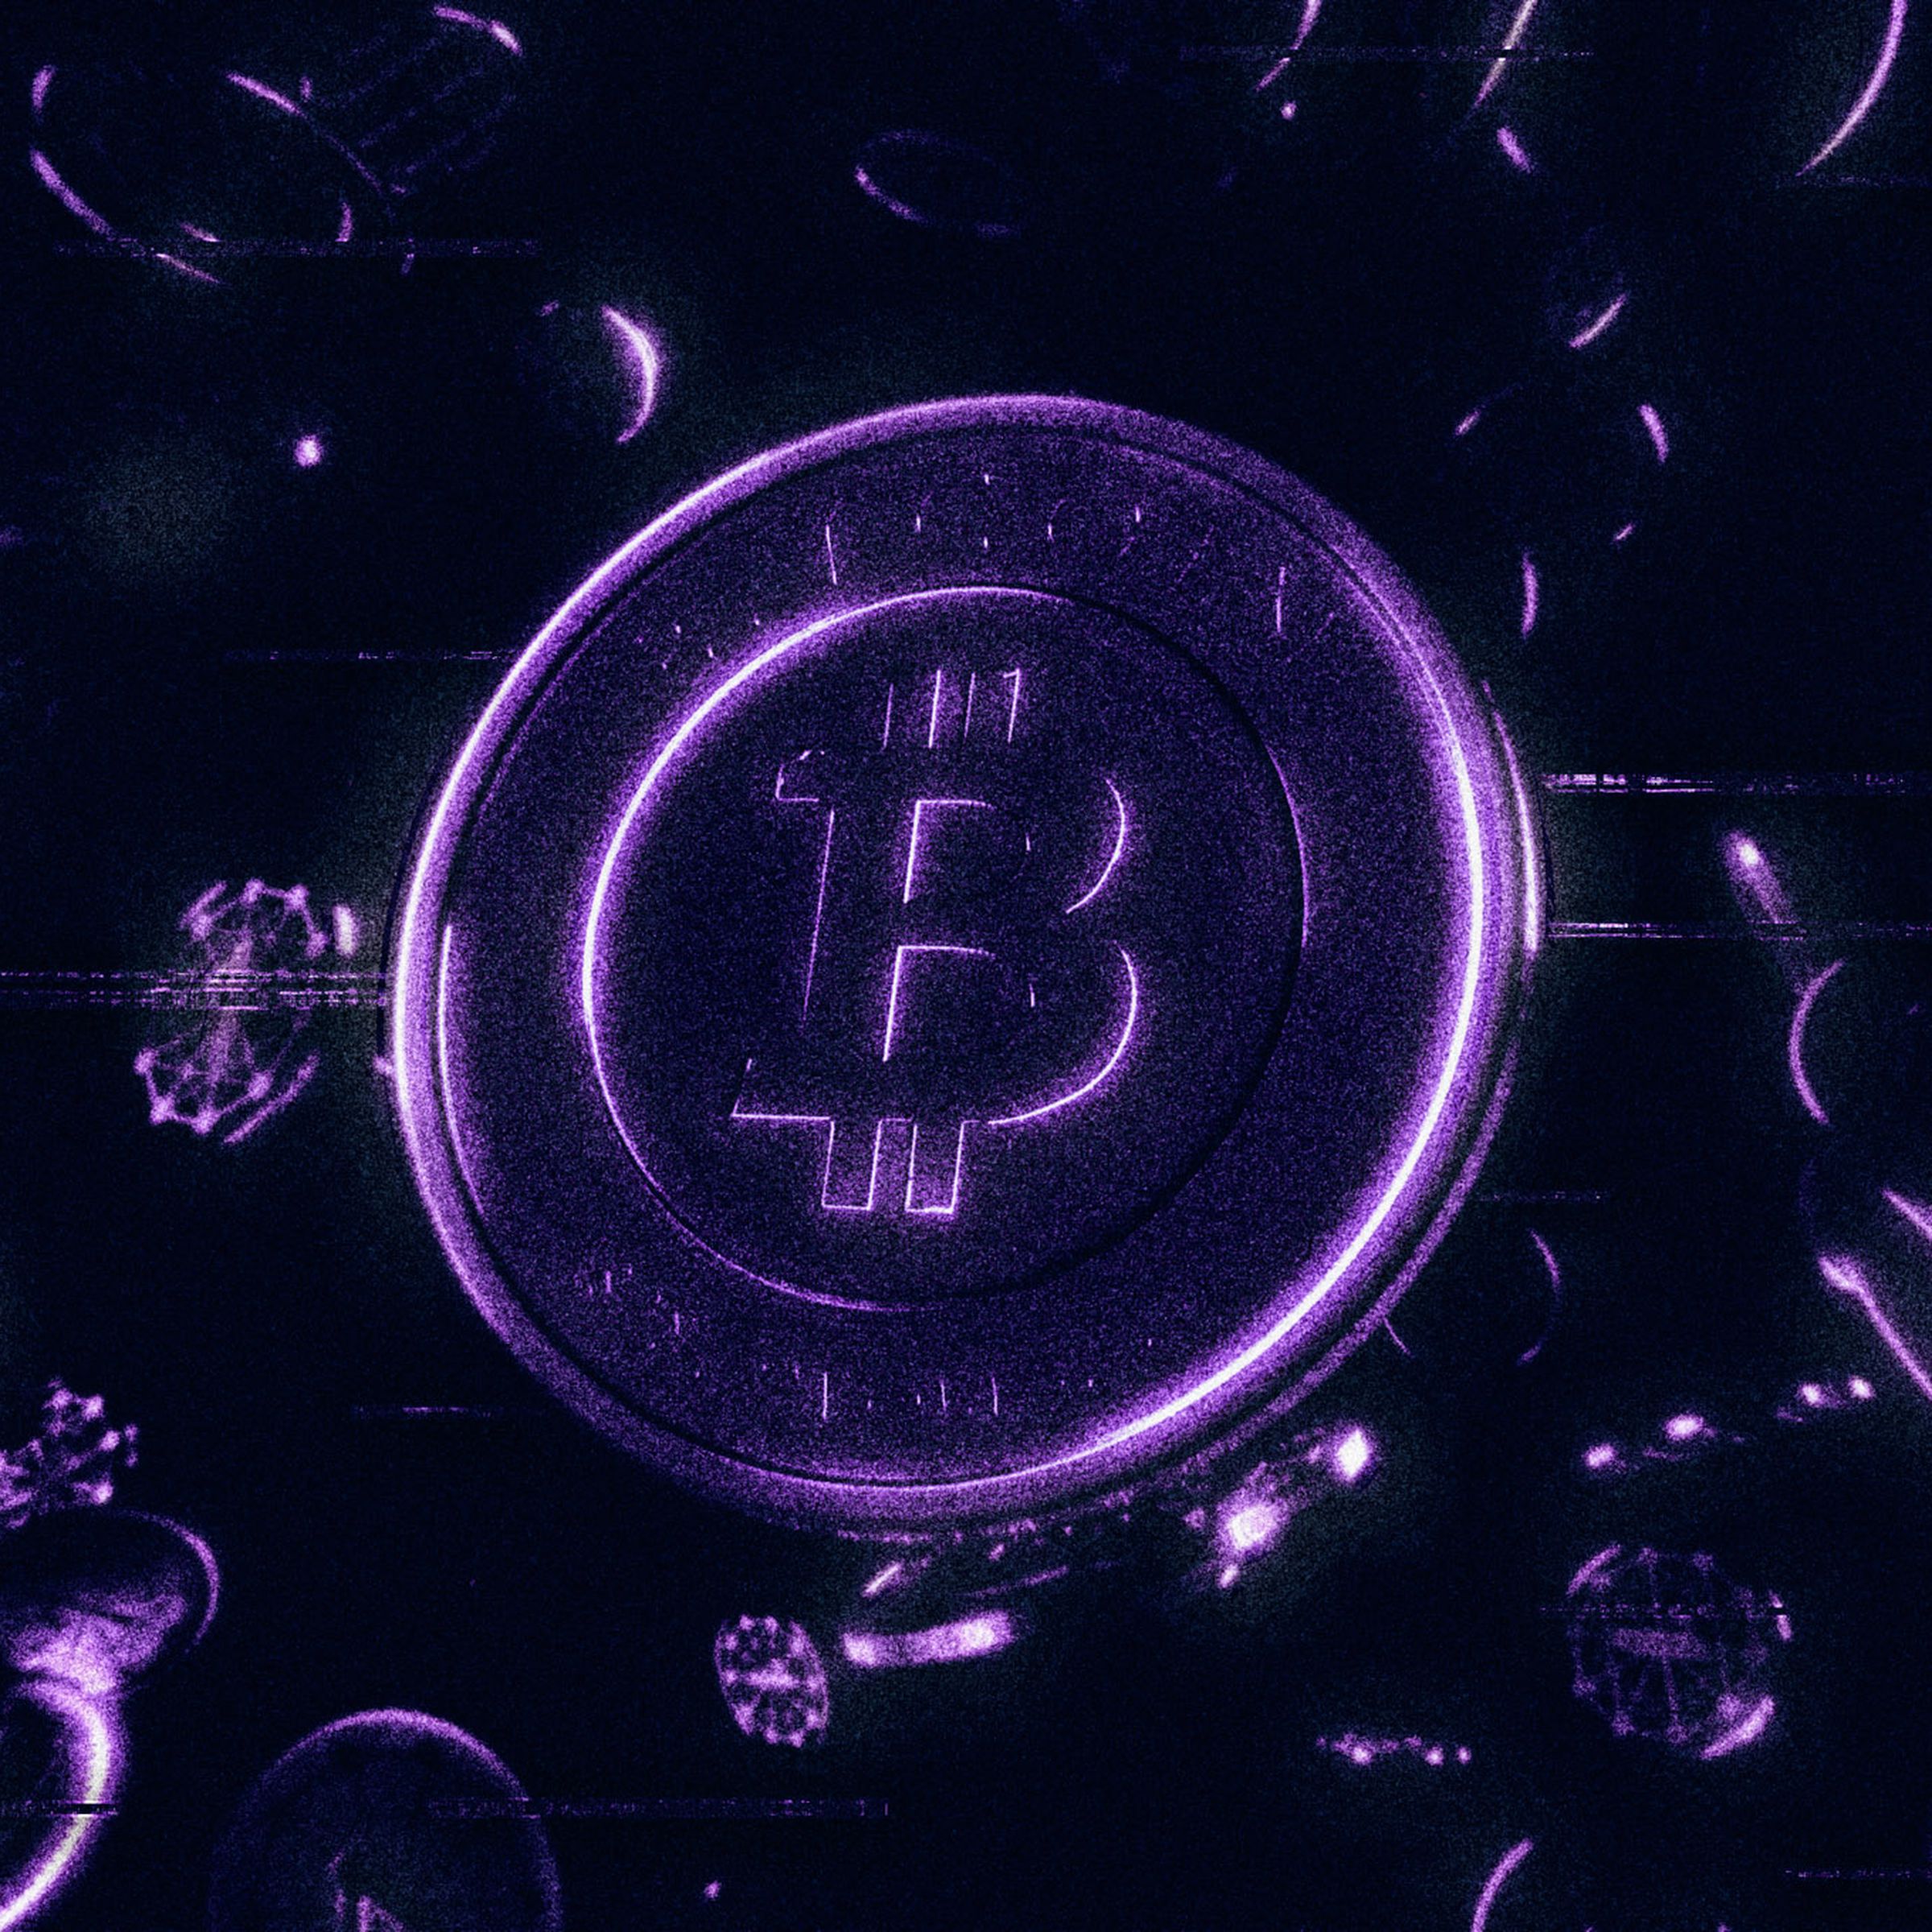 A stylized illustration of a Bitcoin in purple and black shadows.